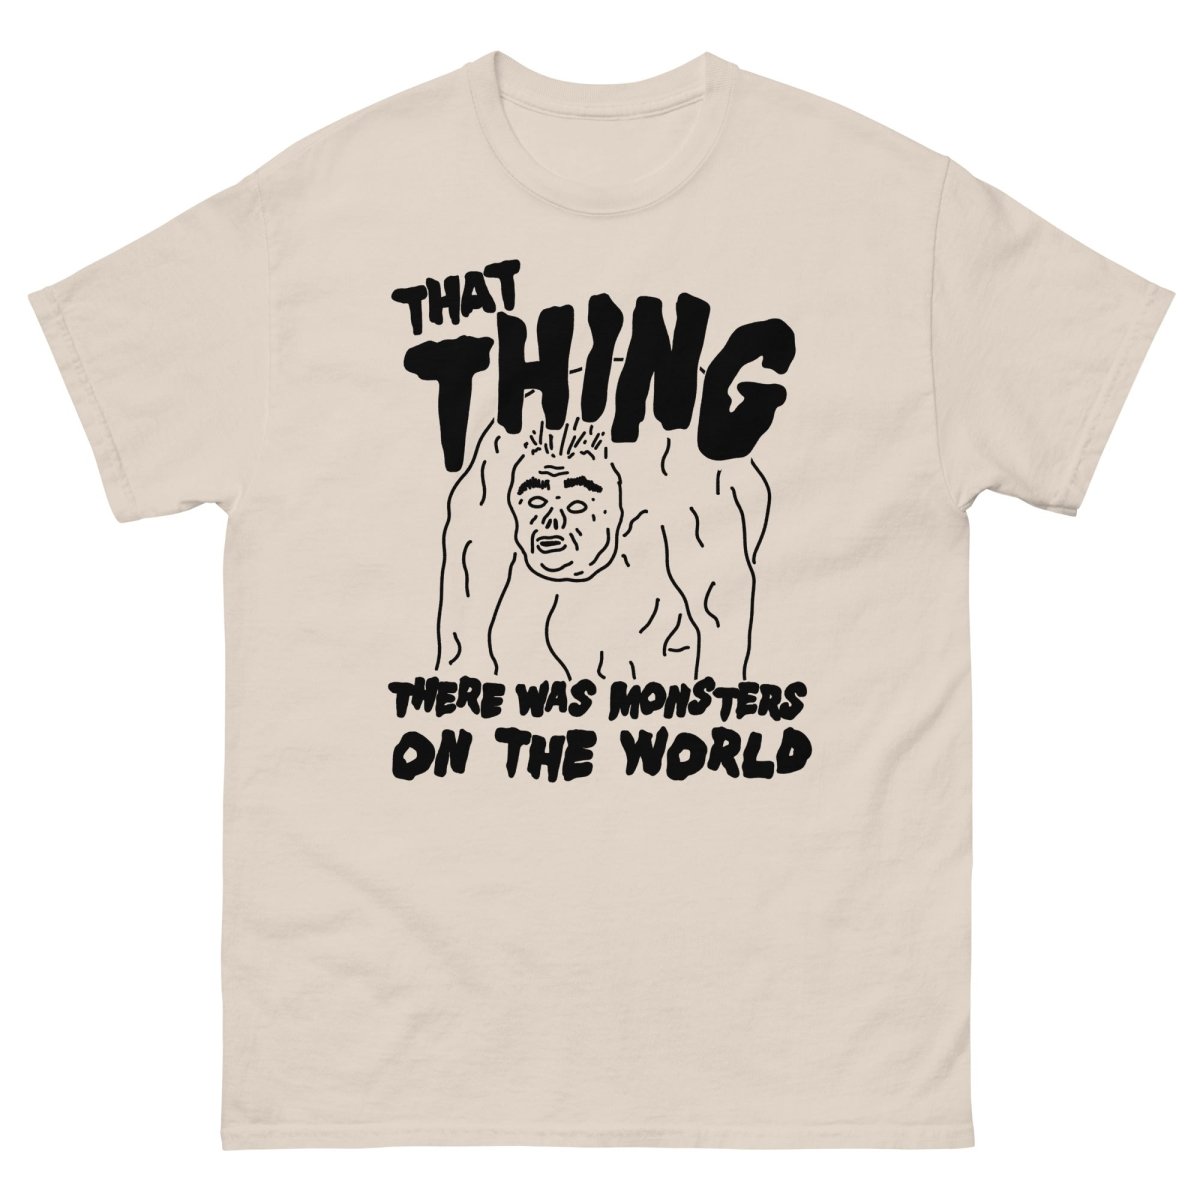 That thing t-shirt. I think you should leave inspired tee. - T-Shirt - Pretty Bad Co.